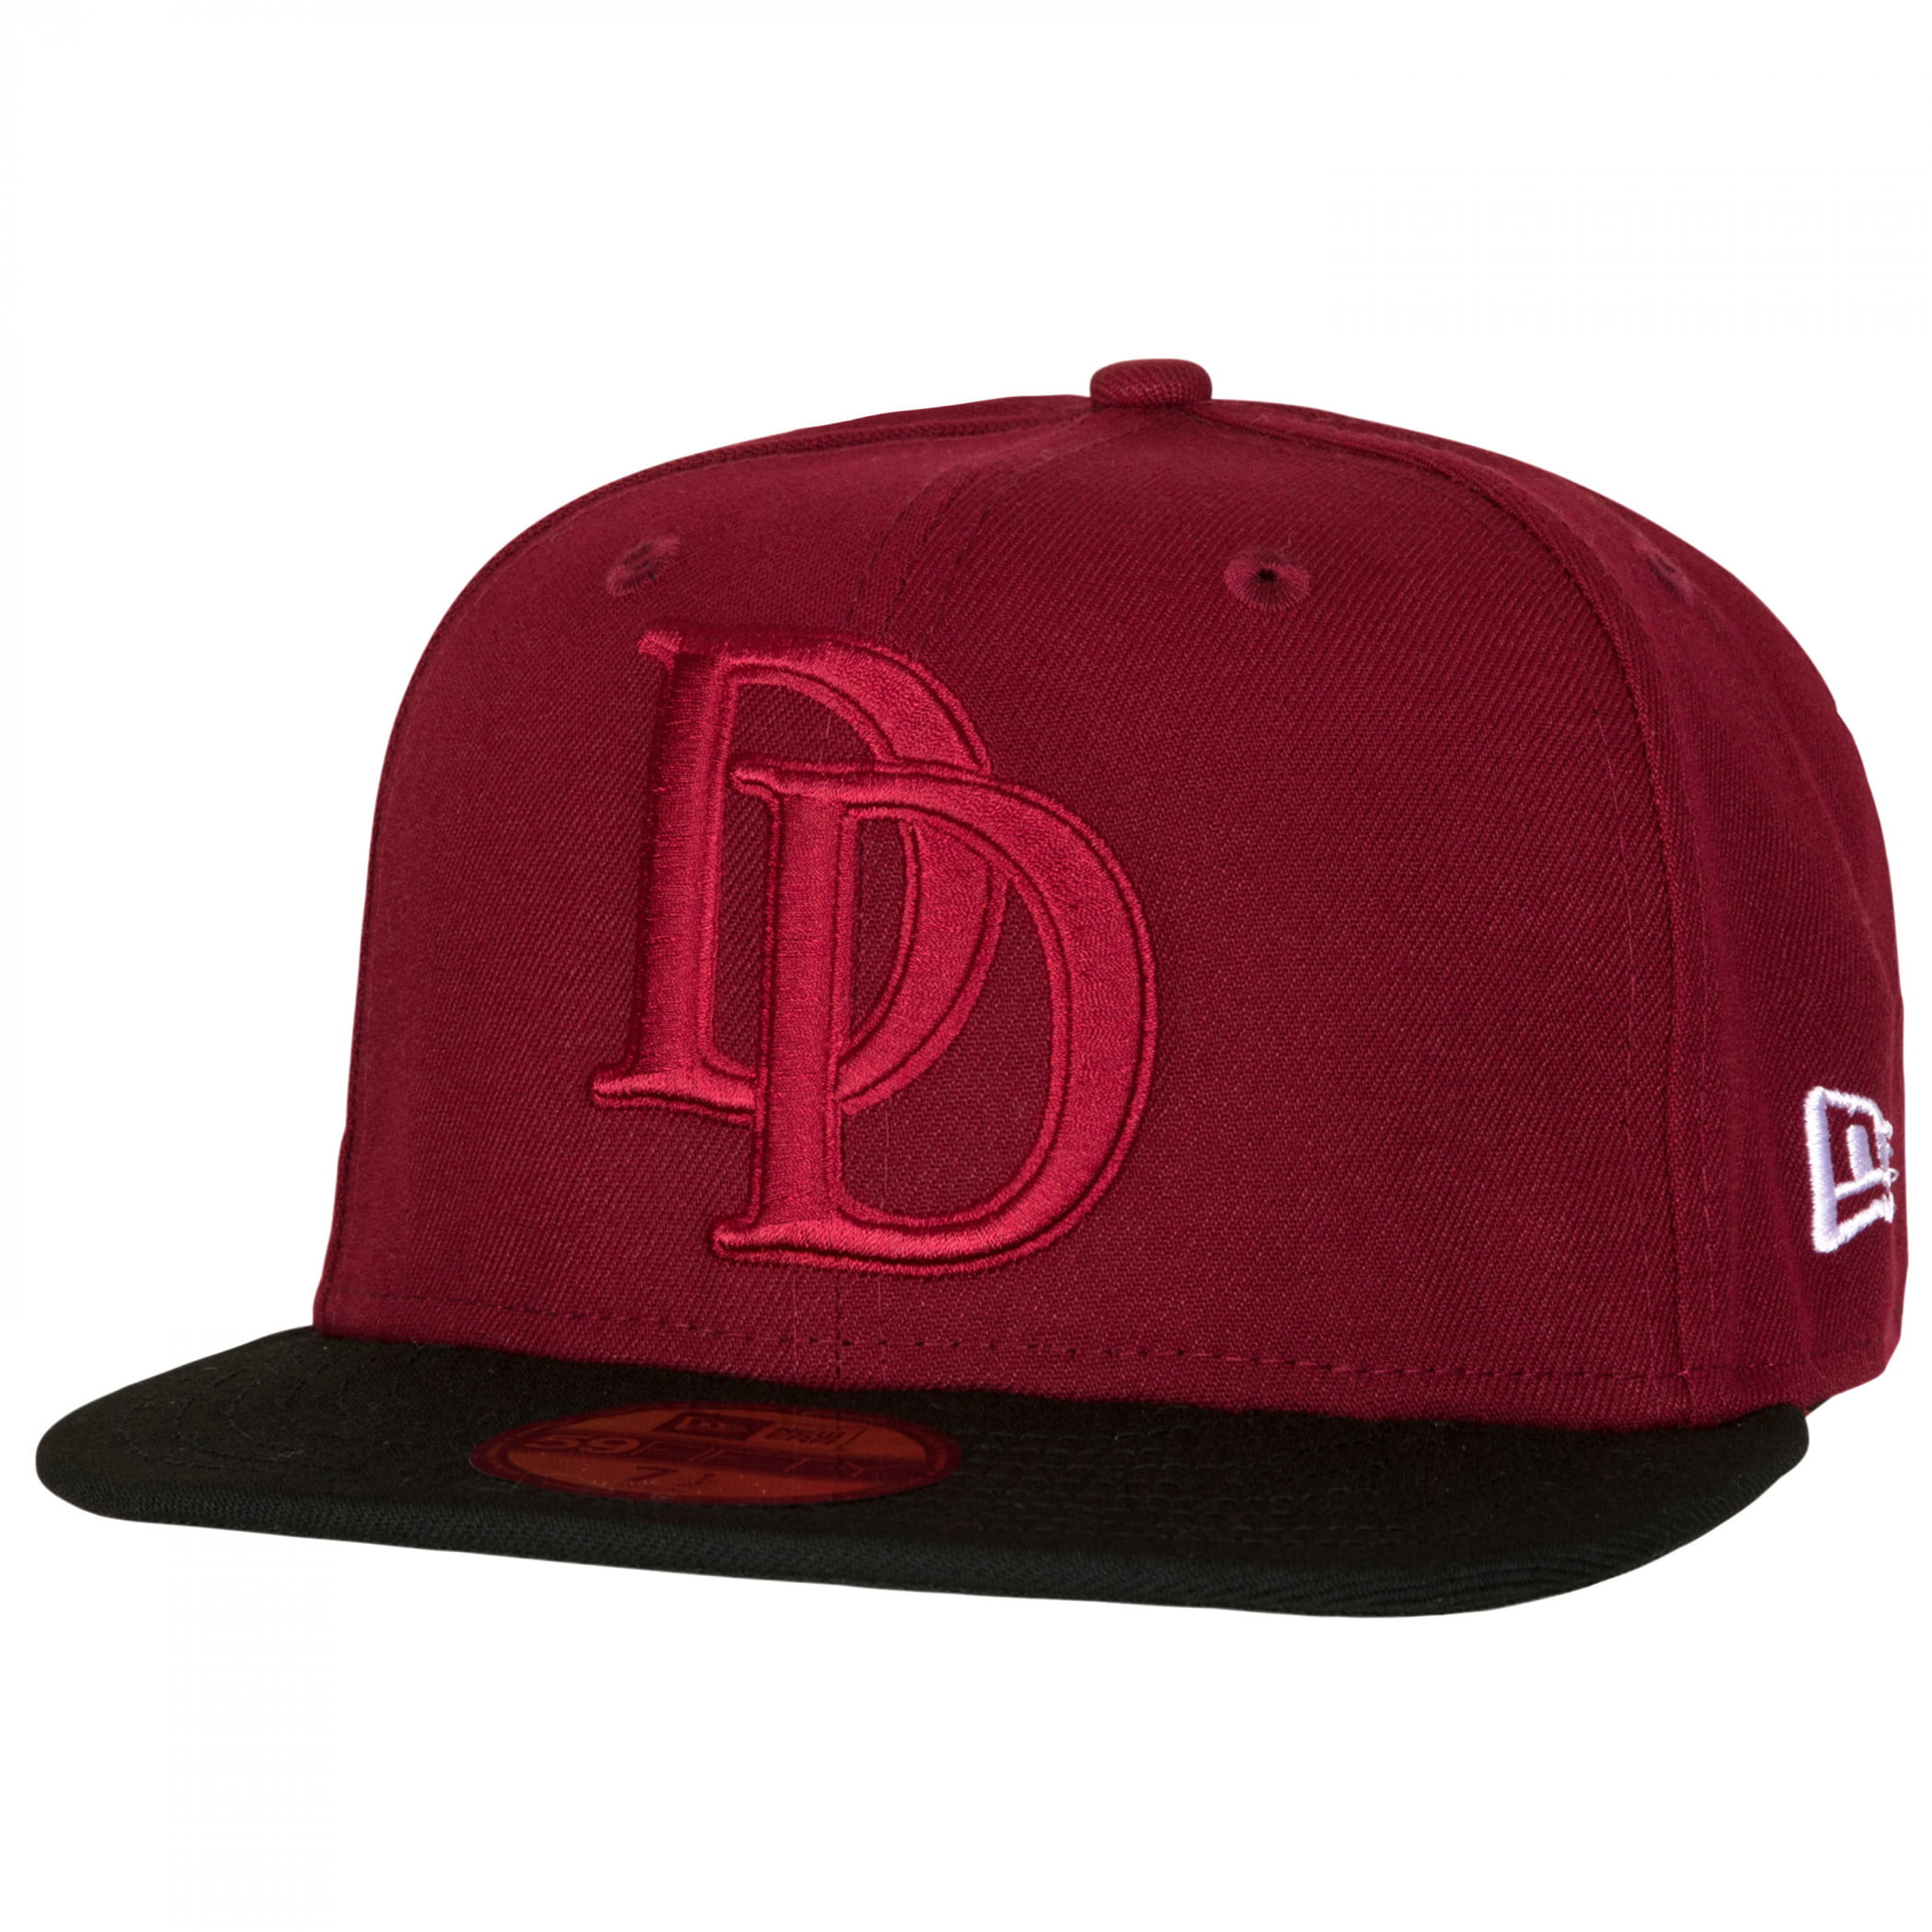 Daredevil Black Brim New Era 59FIFTY Fitted Hat - 8 Fitted